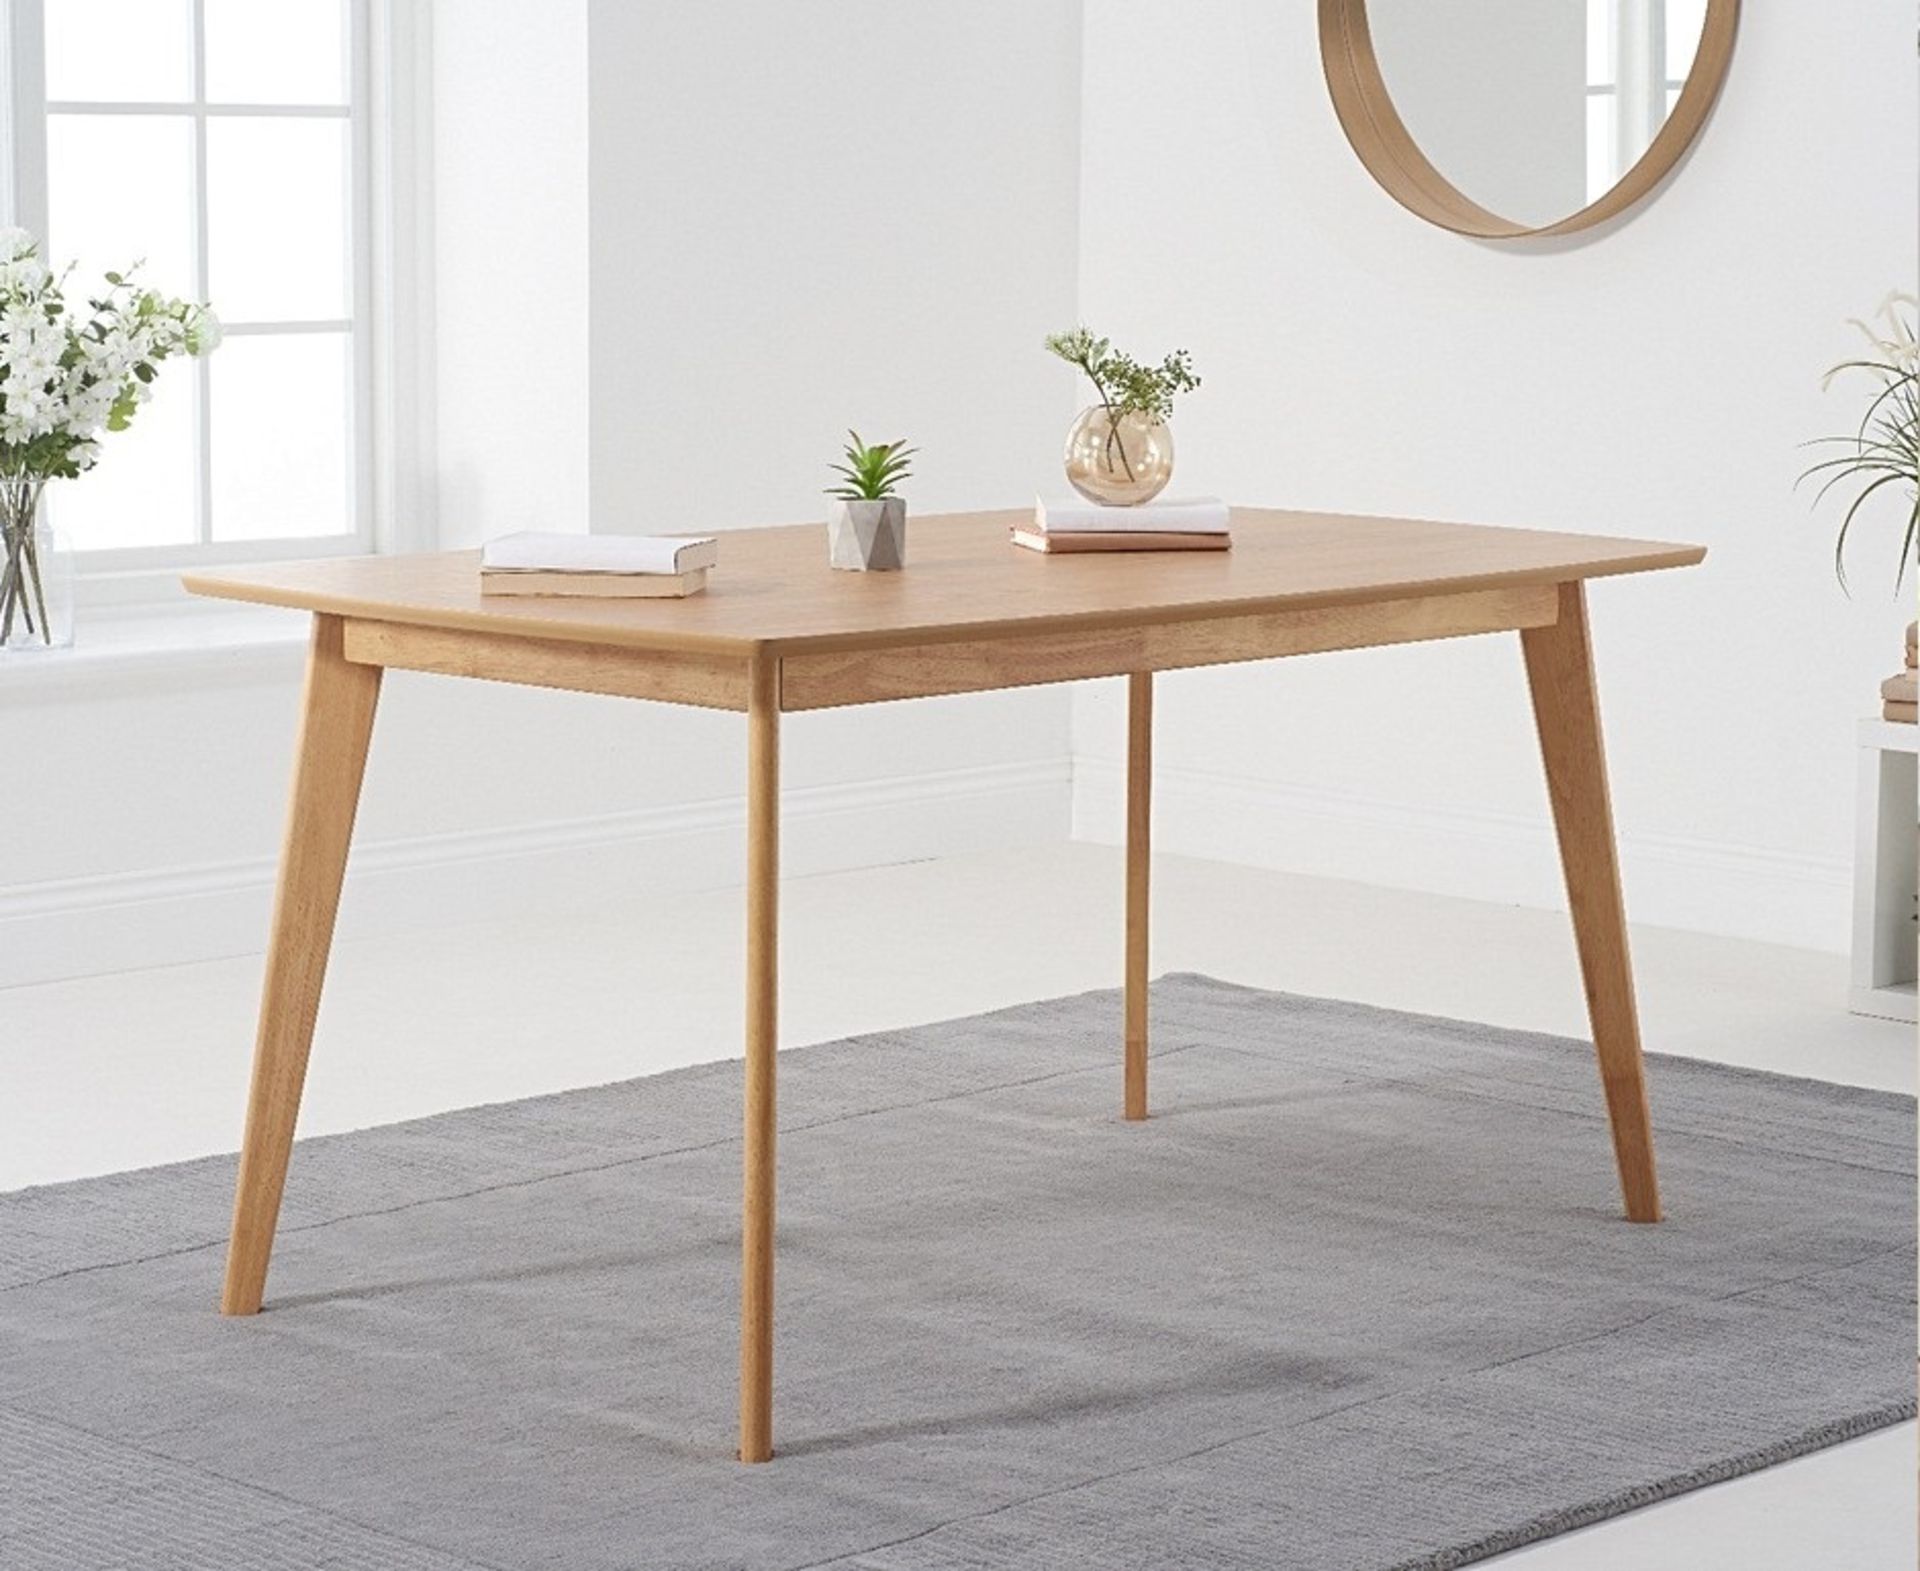 Sacha 120cm Dining Table The Sacha collection combines contemporary lines and shaping with sturdy,